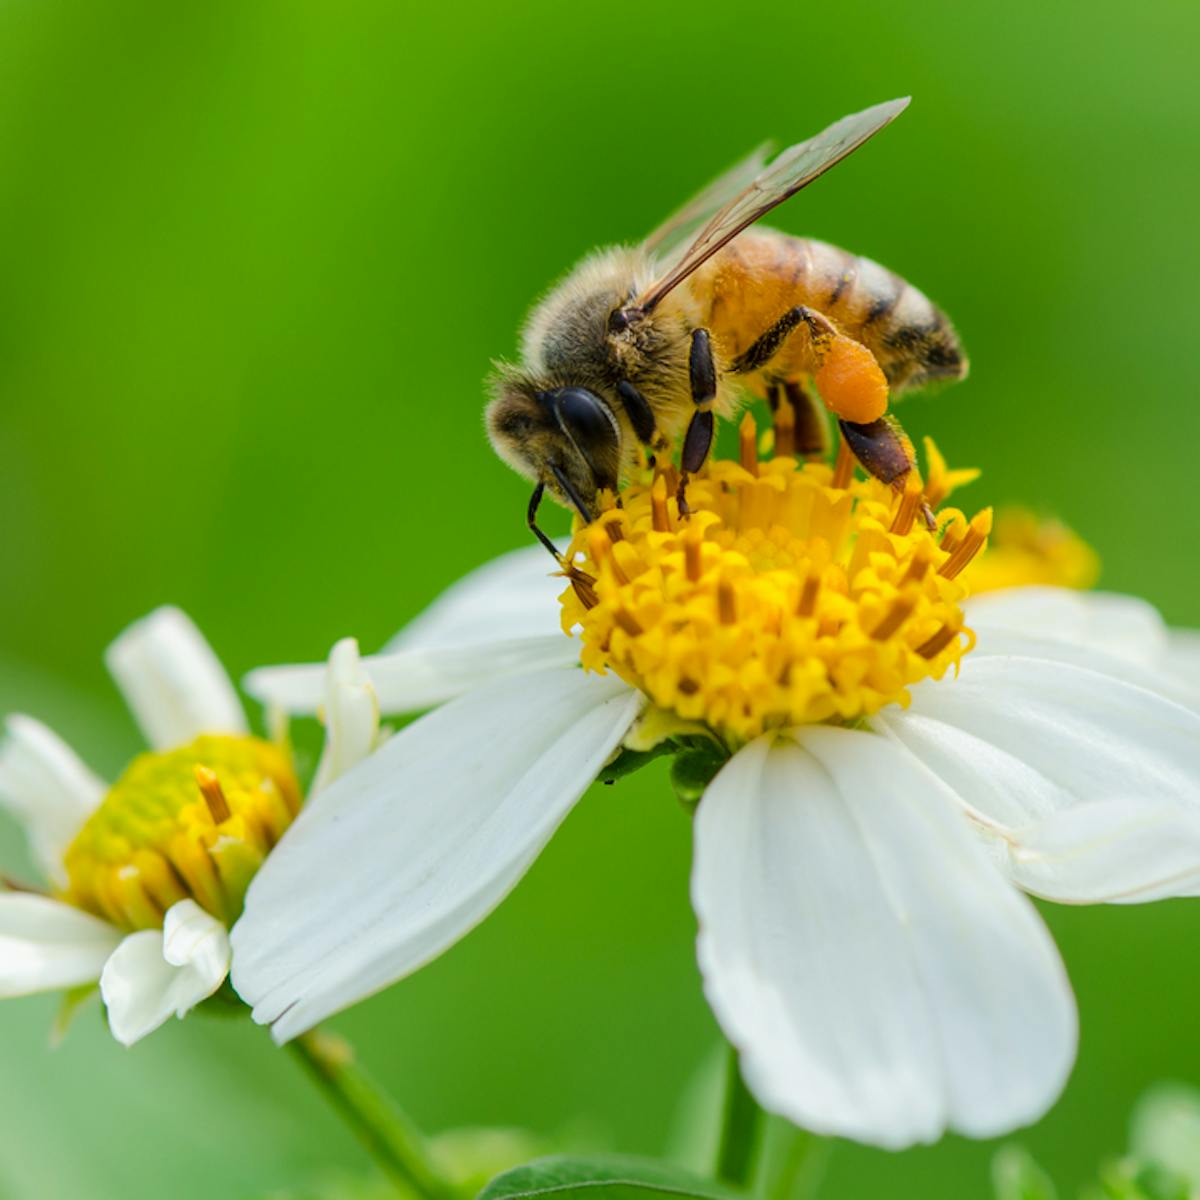 Bees in the city: Designing green roofs for pollinators